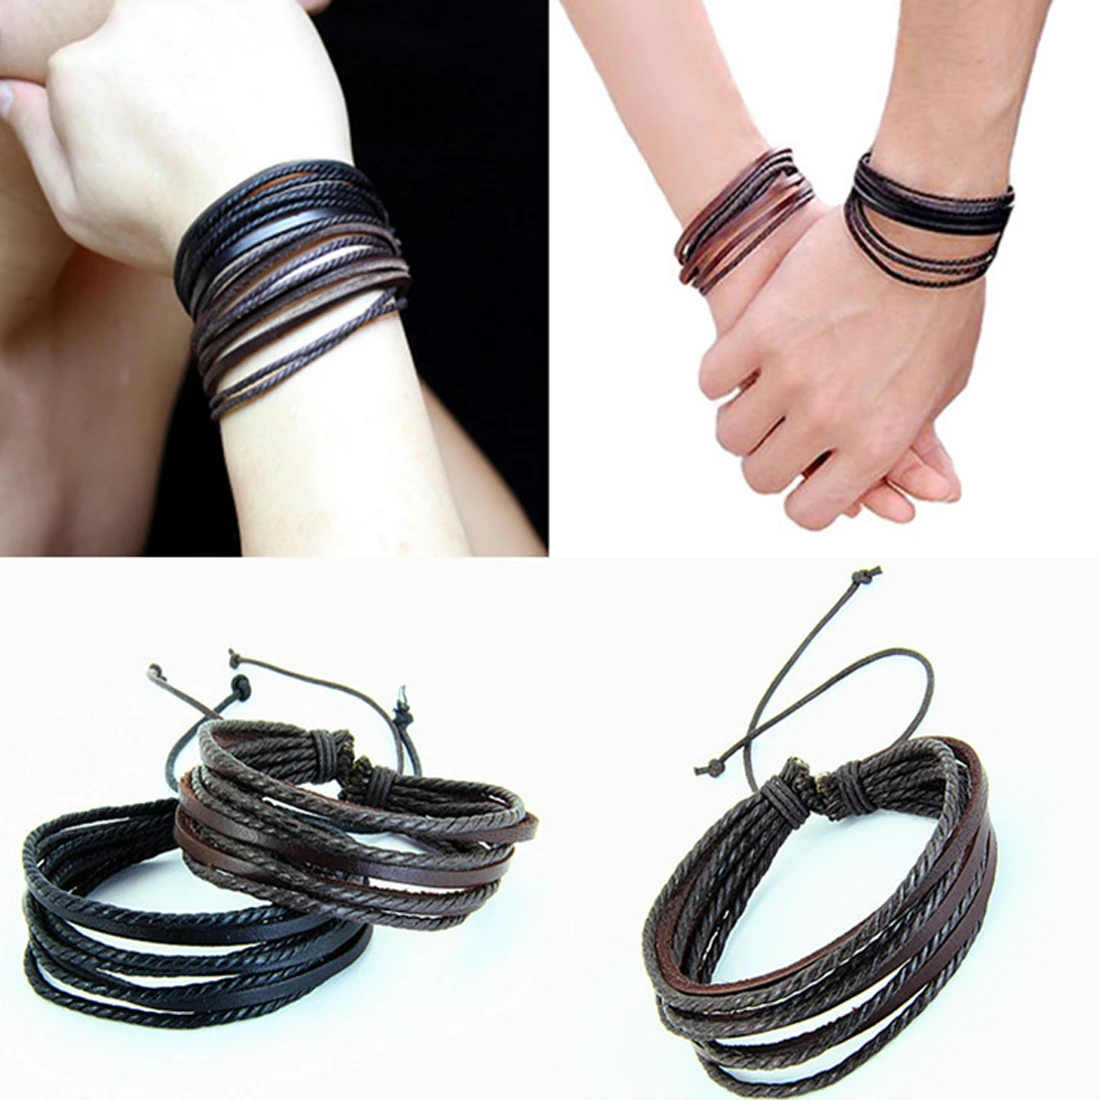 Hot Sell 100% Hand-Woven Fashion Jewelry Wrap Multilayer Leather Braided Rope Wristband Men Bracelets & Bangles For Women